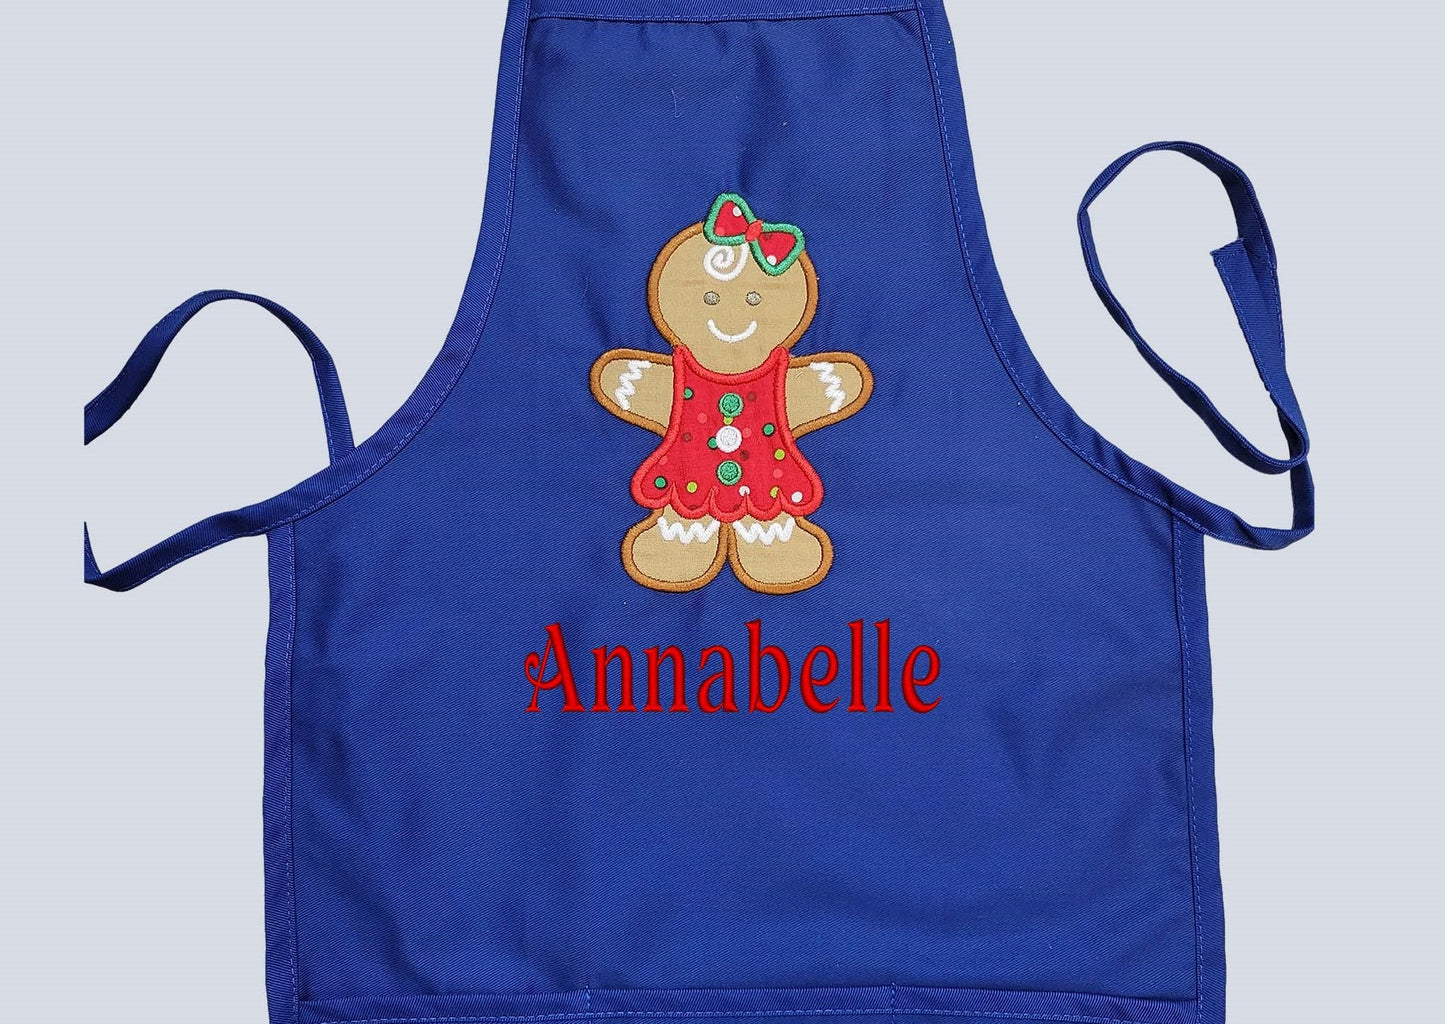 Kids Personalized Apron | Christmas Gift For Kids  | Child Gingerbread Embroidery Xmas Aprons